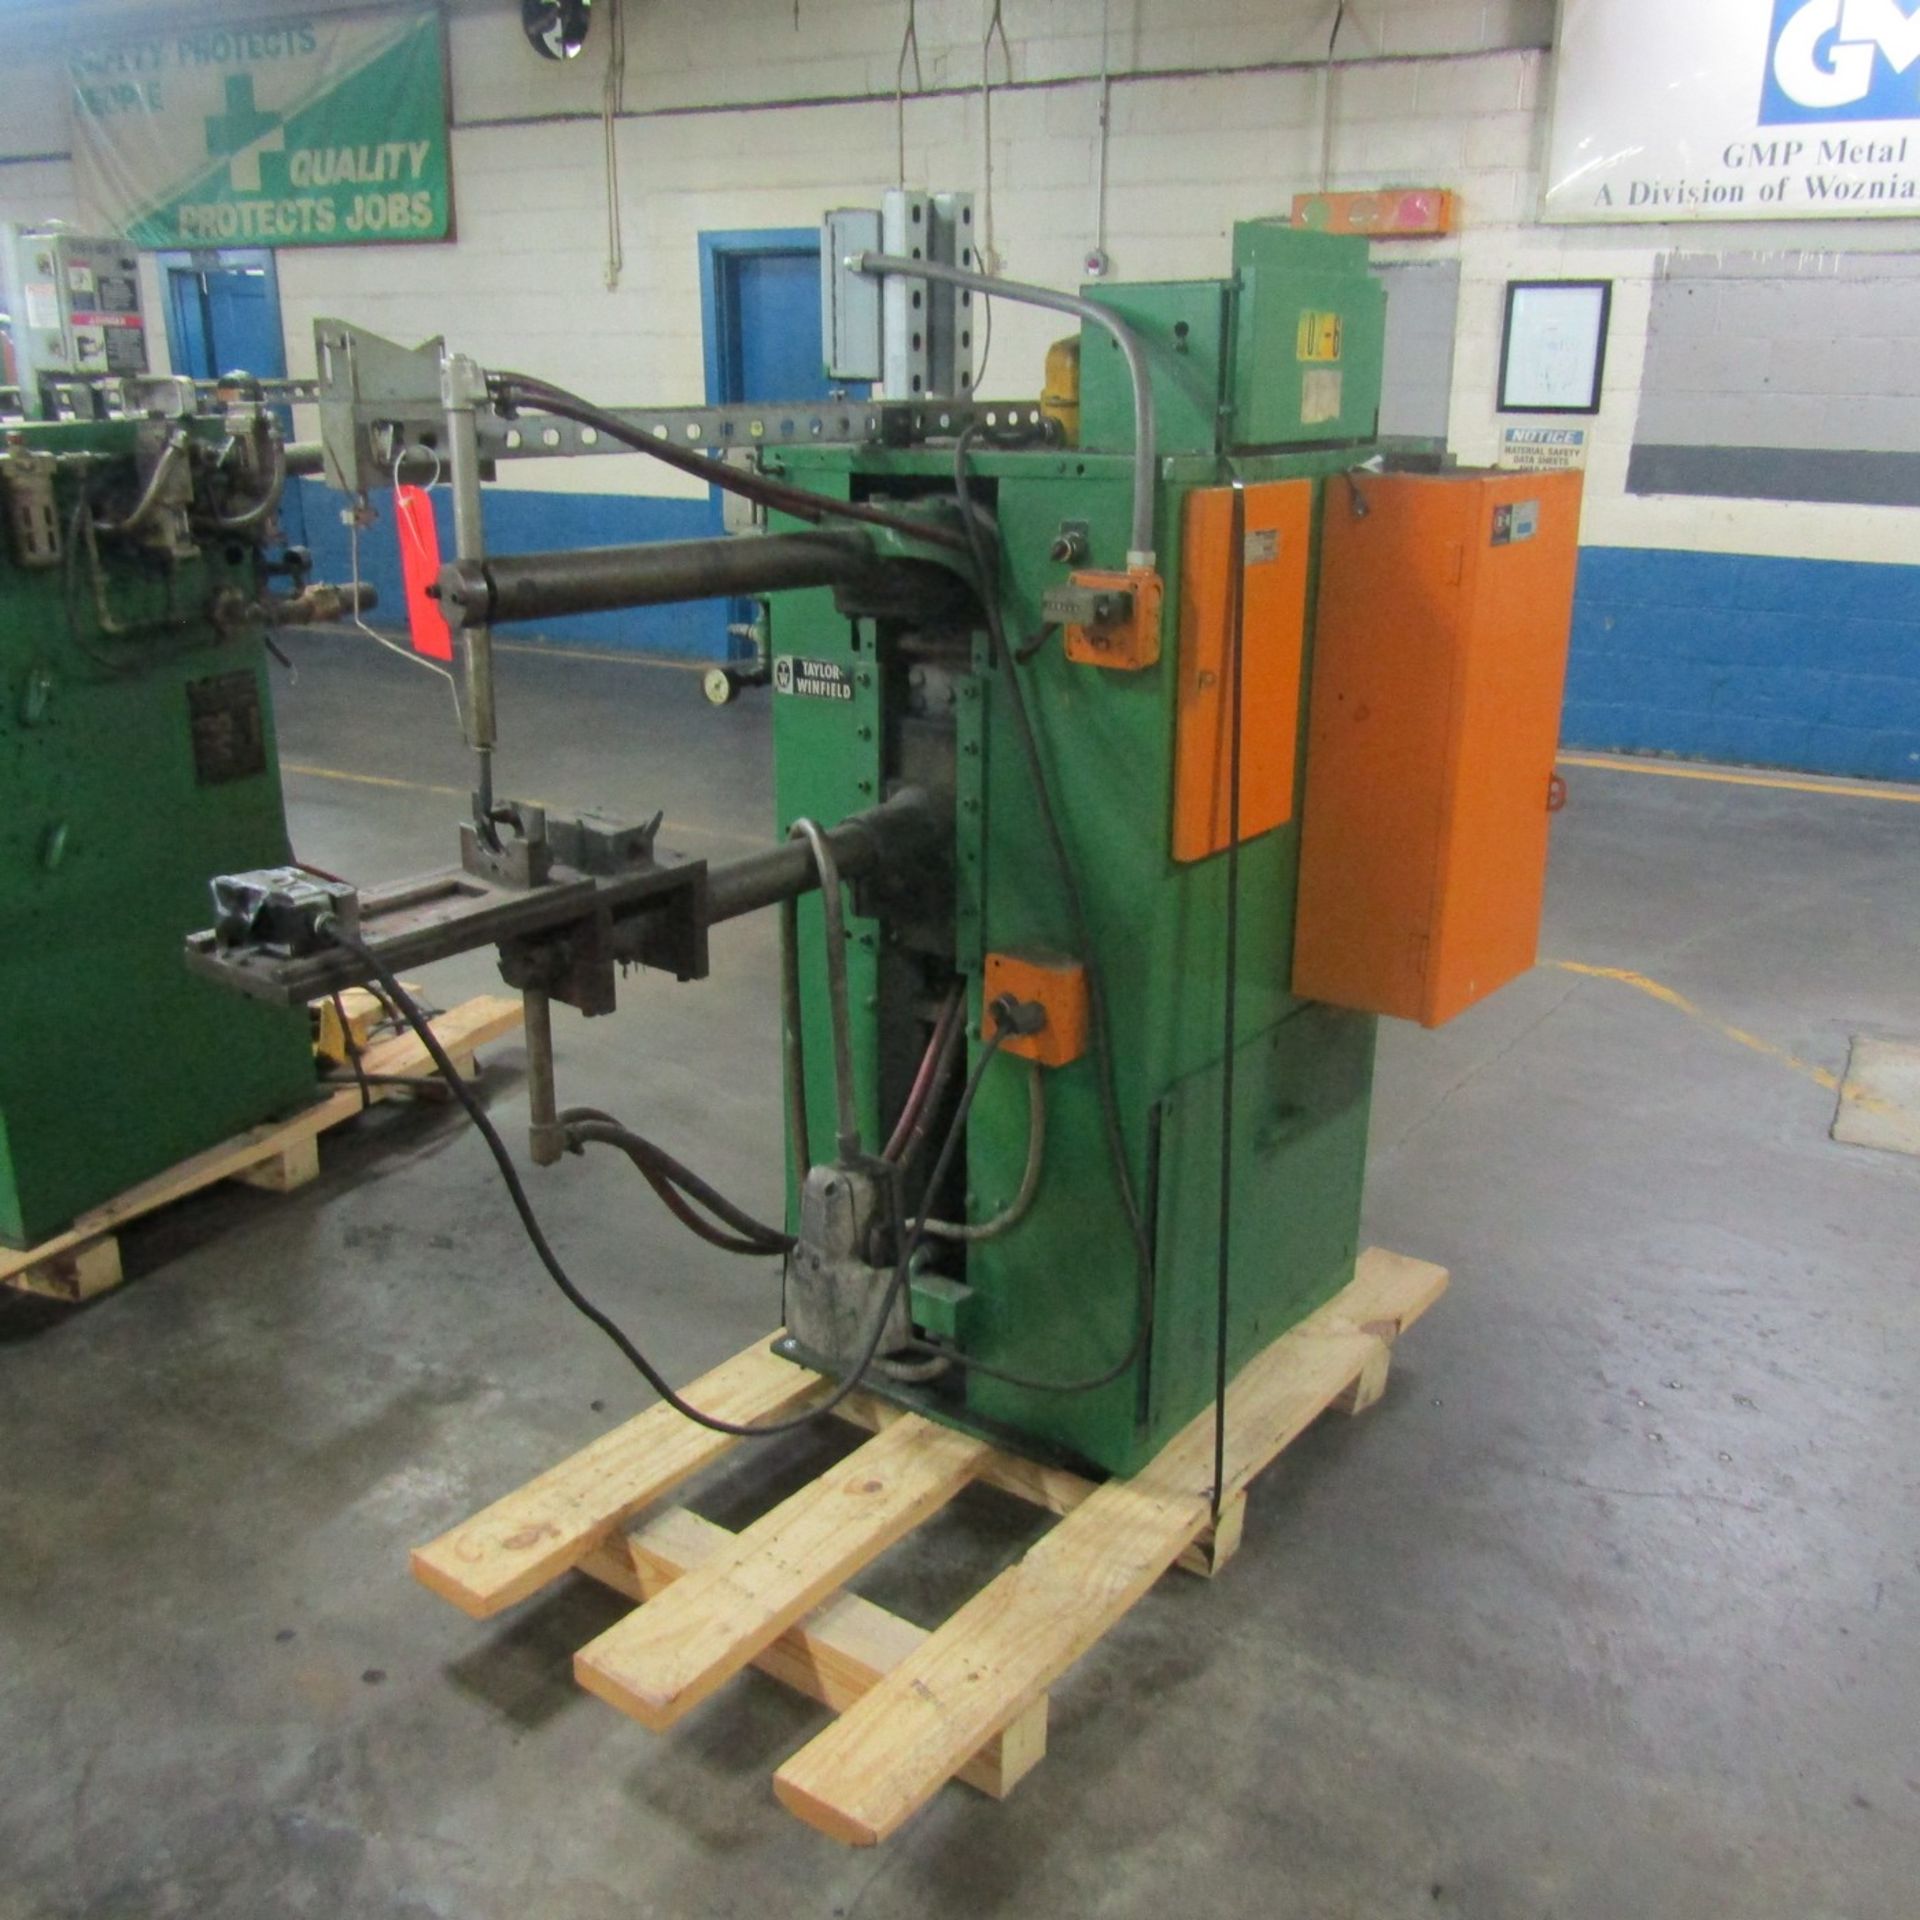 Taylor Winfield 30-KVA Model ND-24-30AIROPER Spot Welder, S/N: 73916-B; with 24 in. Throat, Detect- - Image 3 of 5